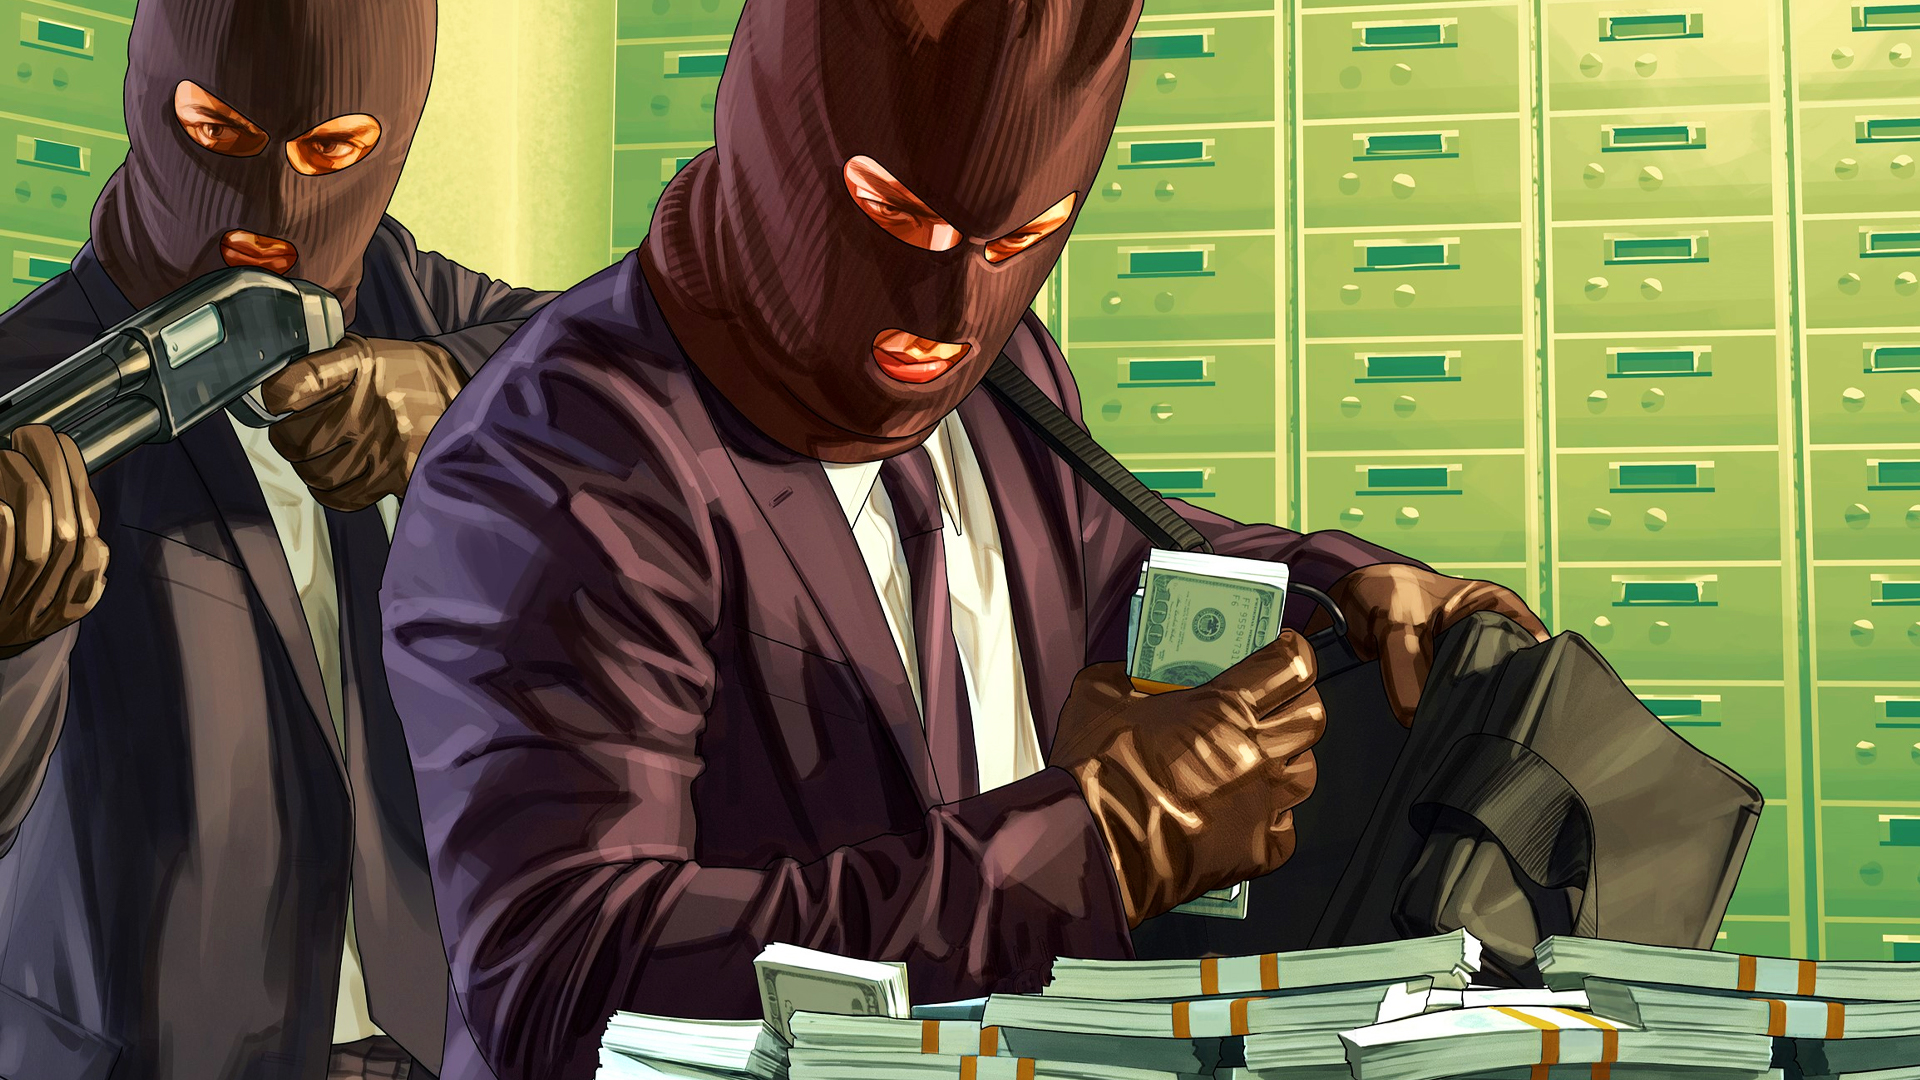 GTA Online Gives You Free GTA$ For Logging In Again - HRK Newsroom